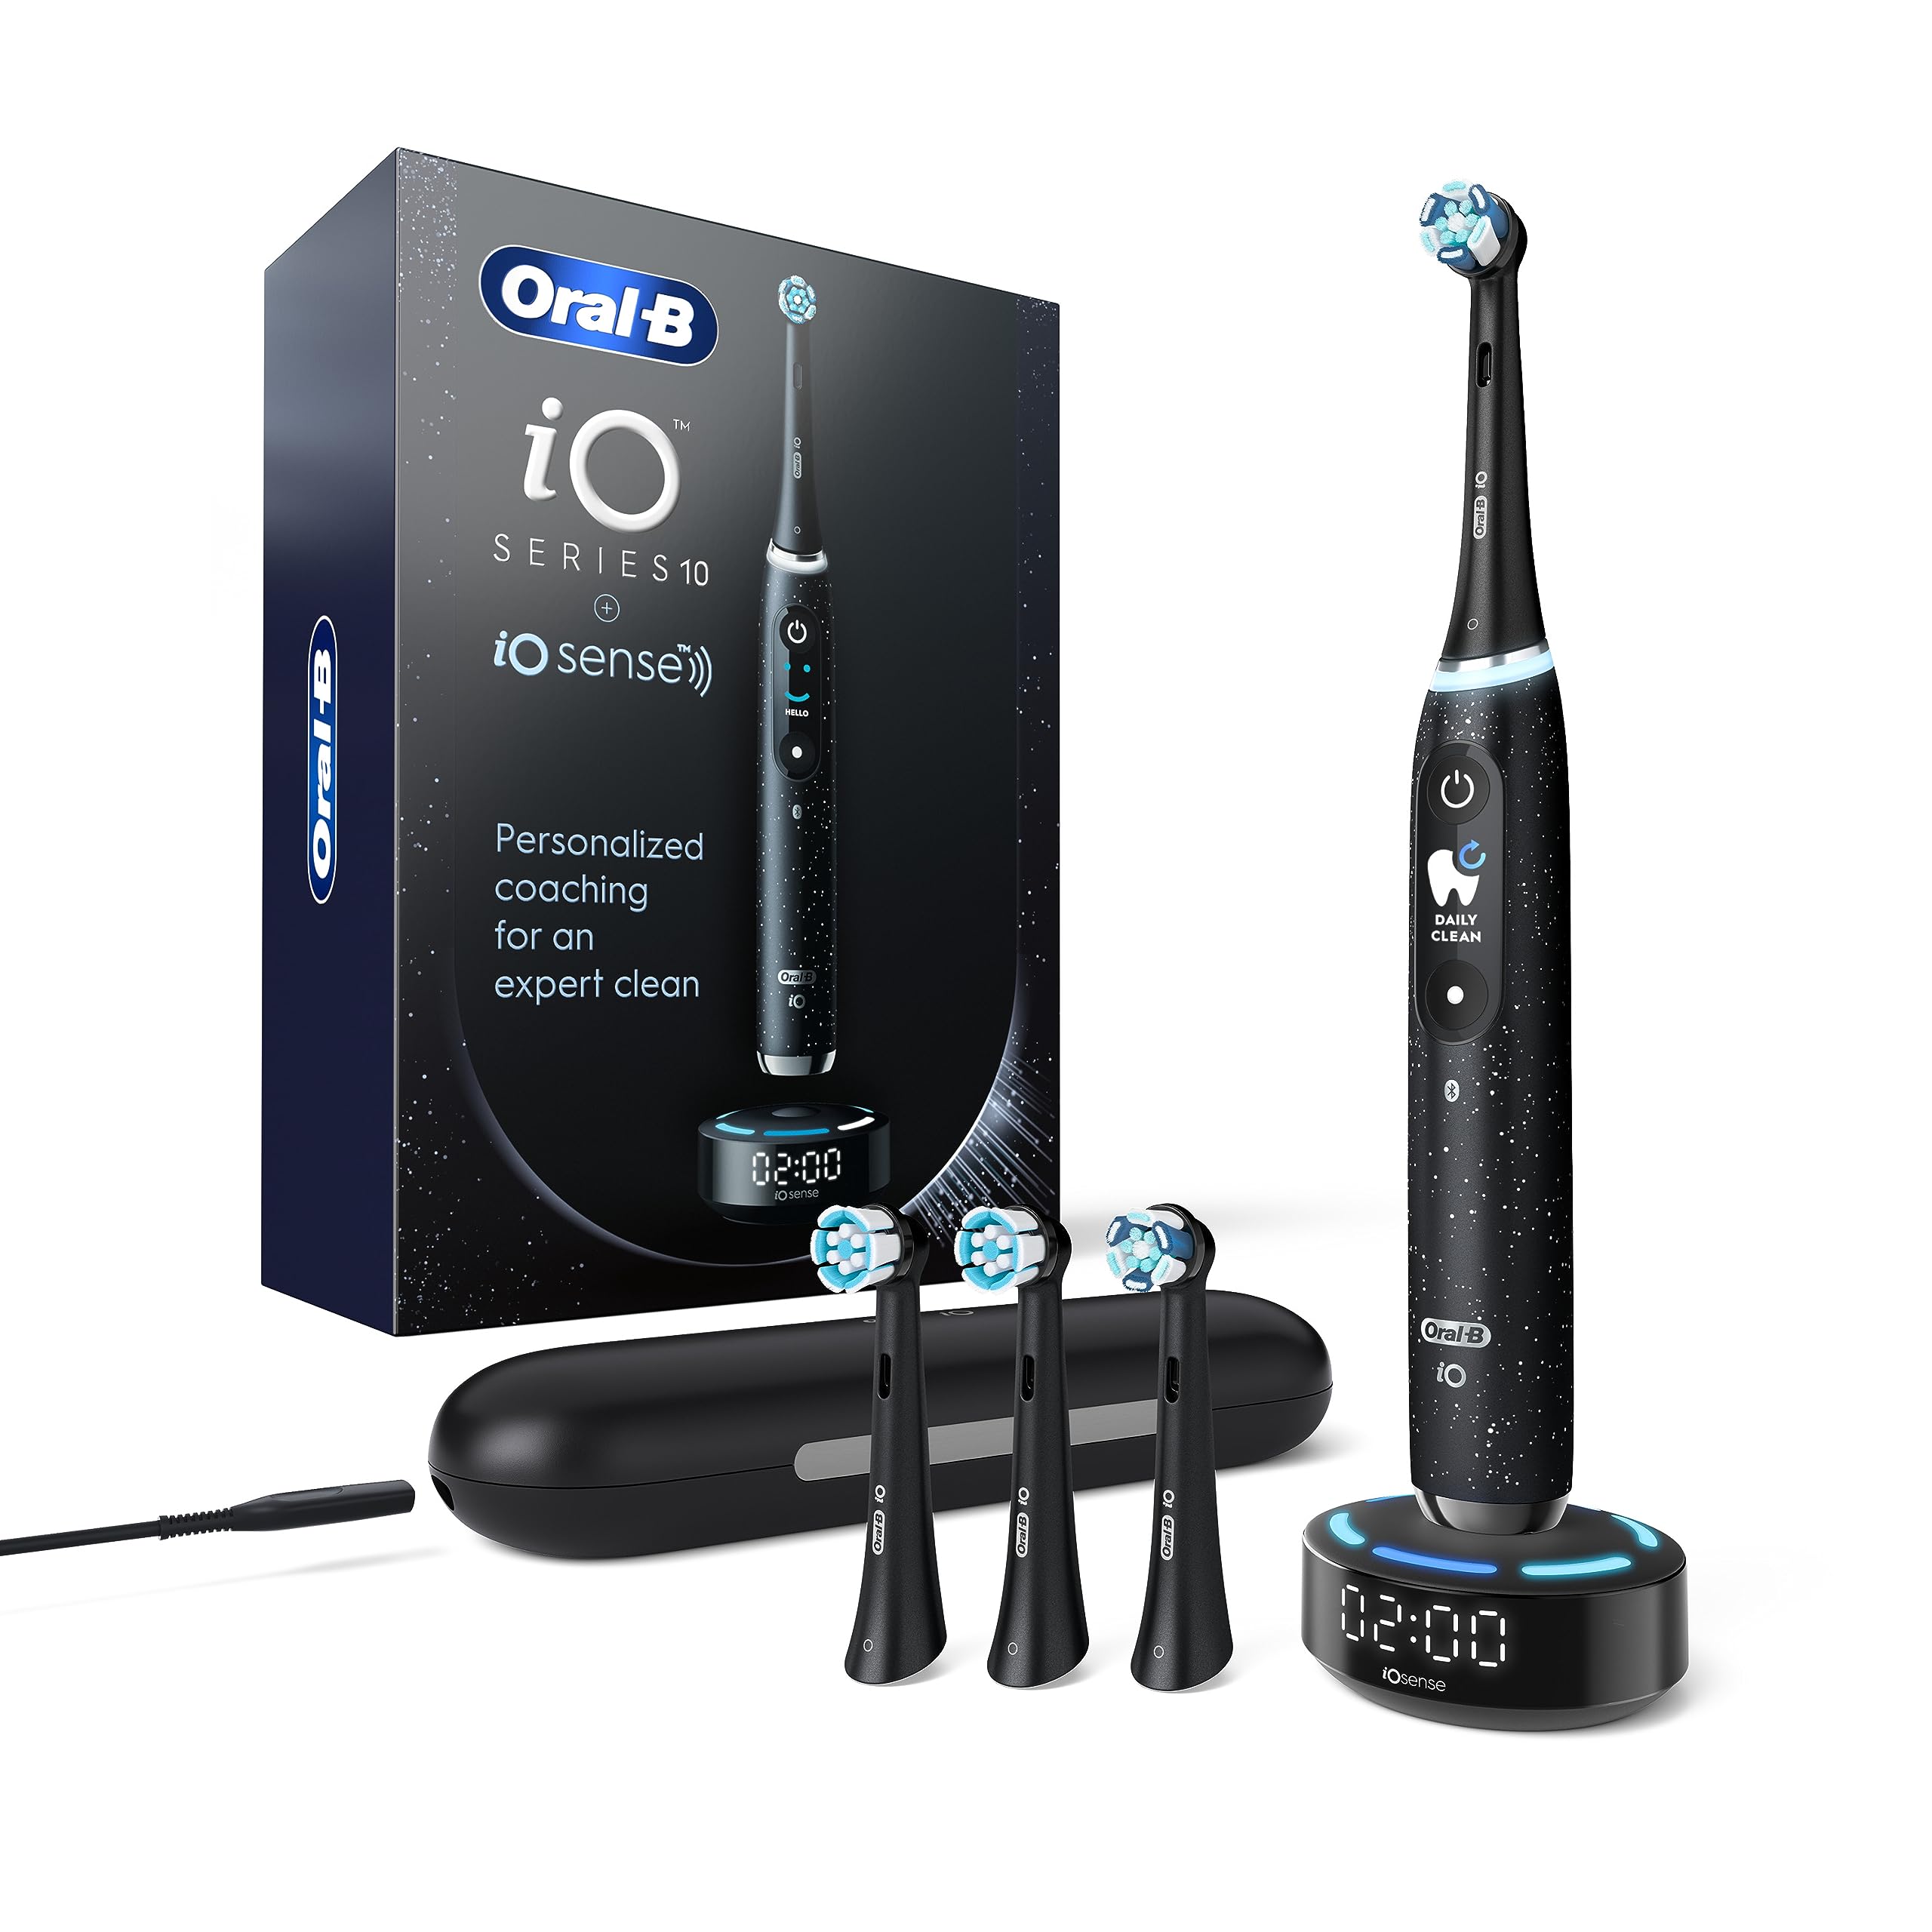 Oral-B iO Series 10 Rechargeable Electric Powered Toothbrush with iO Sense Charger and 4 Replacement Brush Heads, Black